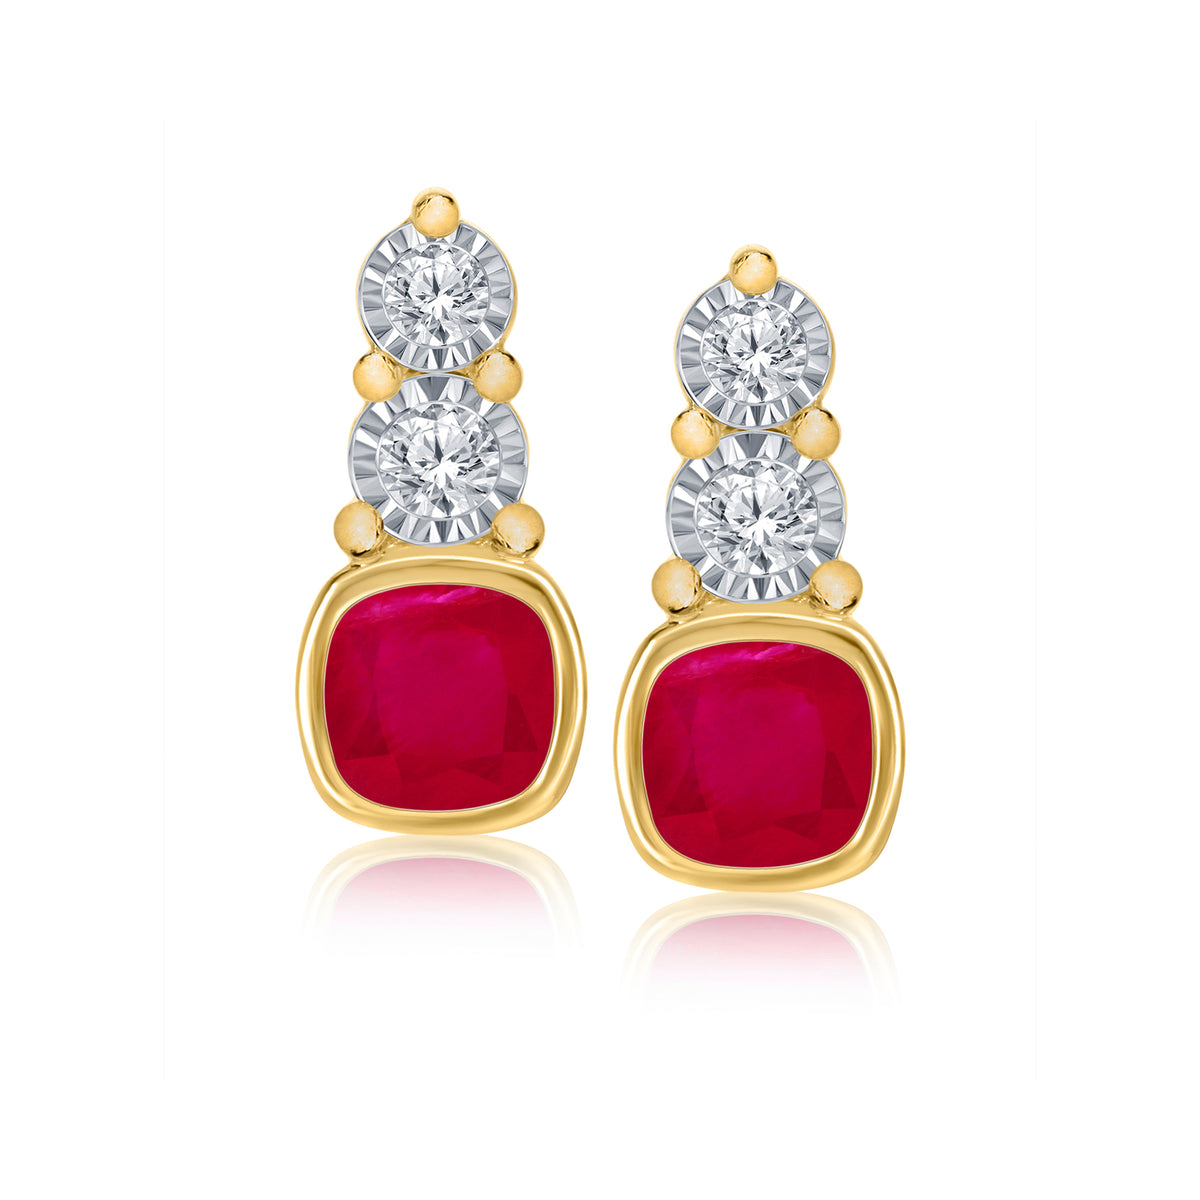 9ct gold 4mm cushion shape ruby &amp; miracle plate diamond studs earrings 0.06ct